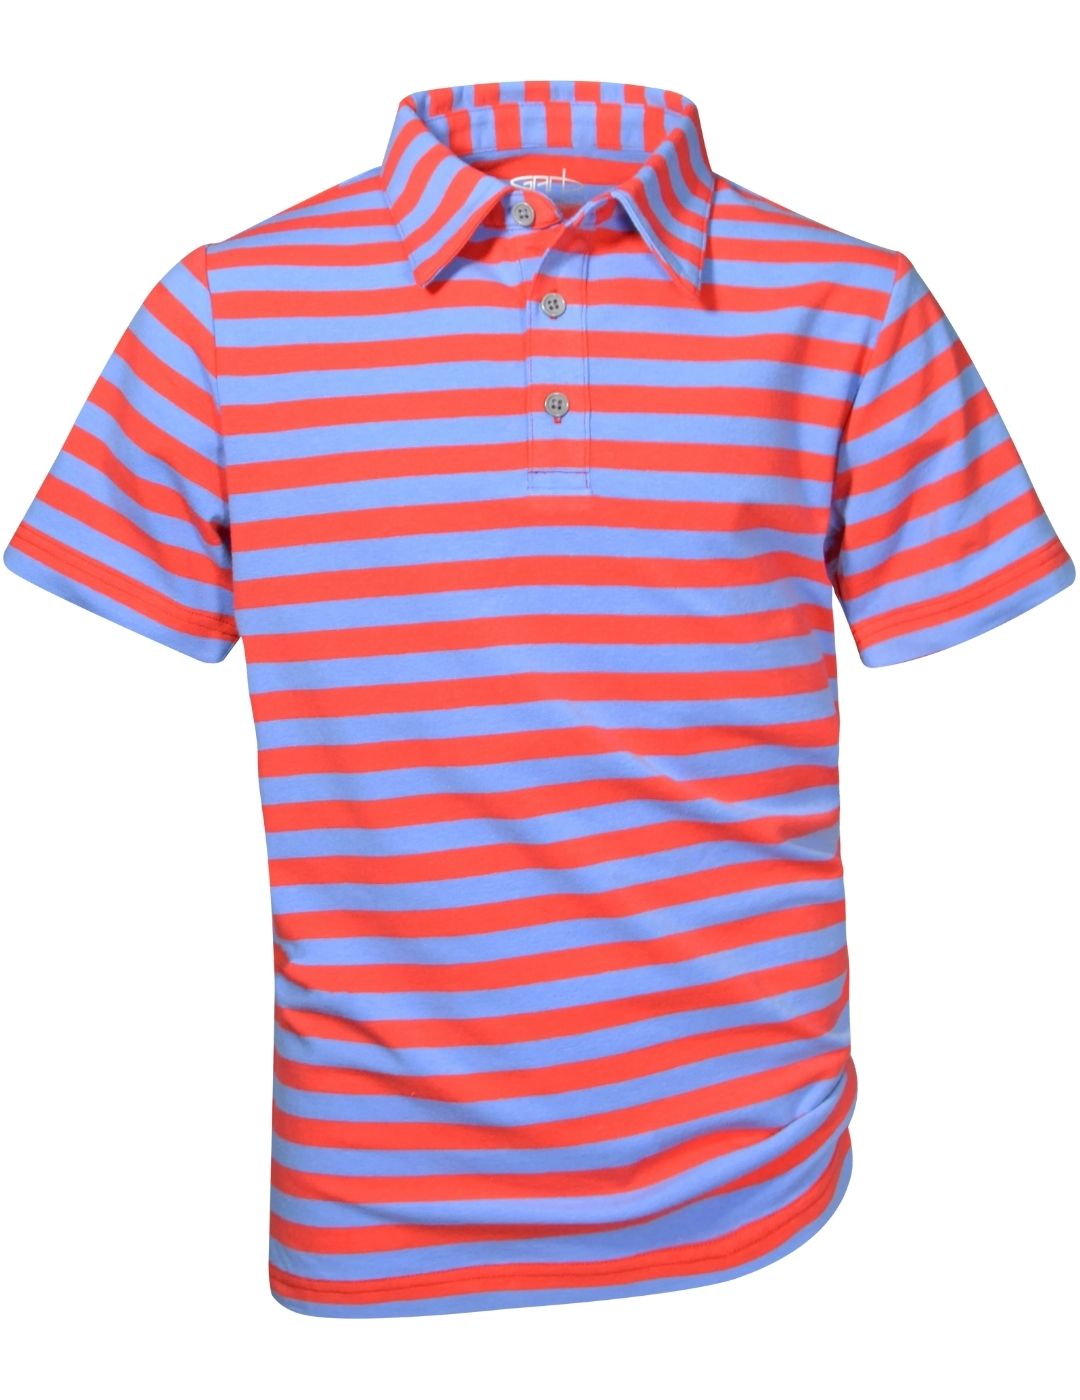 Colby Youth Boys' Polo